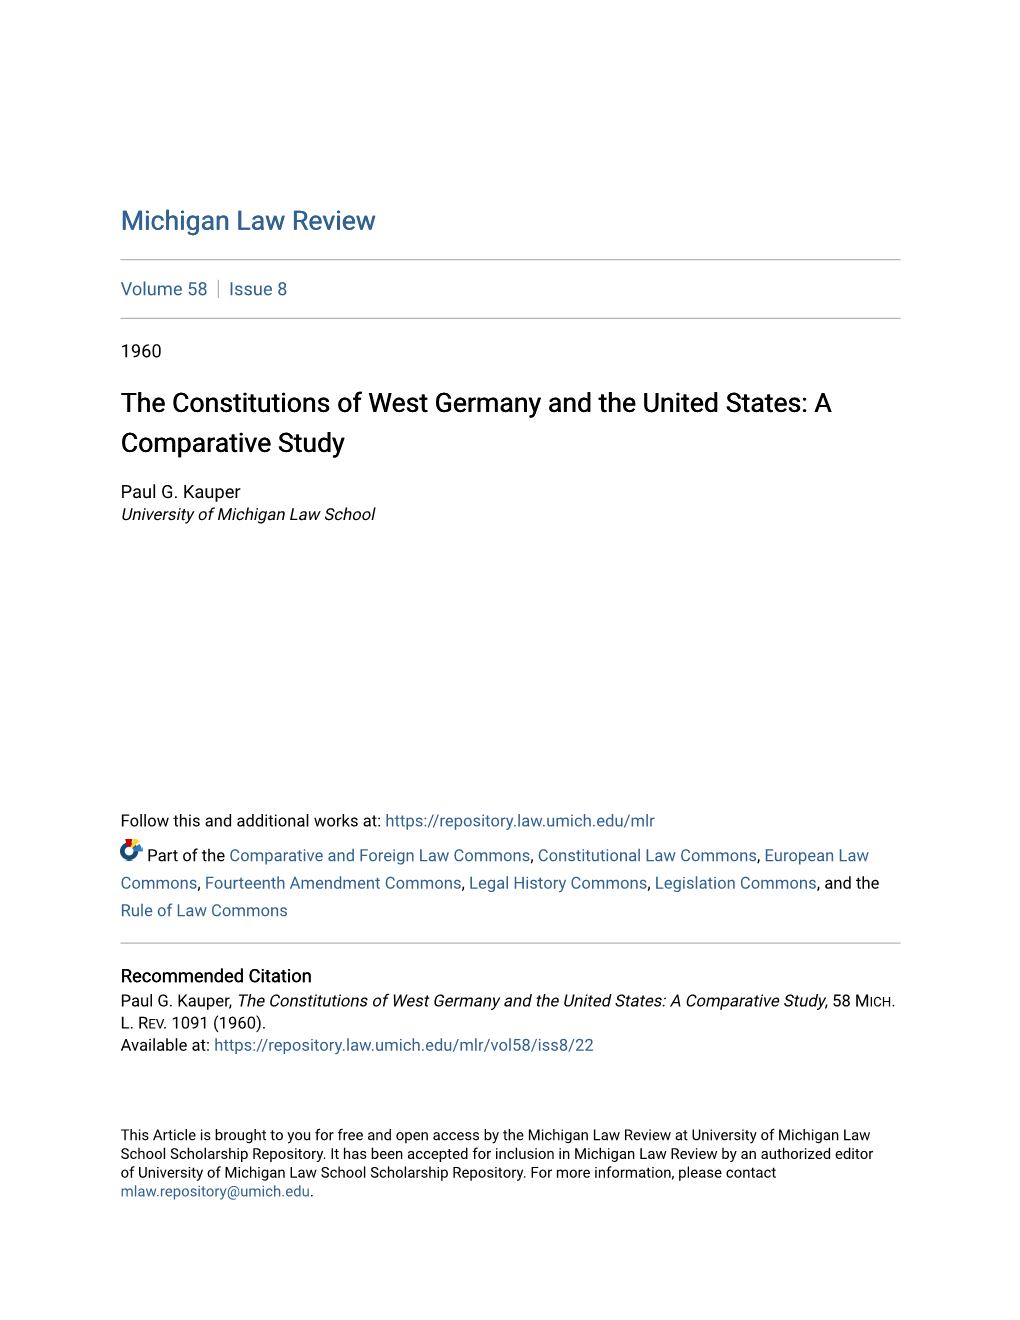 The Constitutions of West Germany and the United States: a Comparative Study